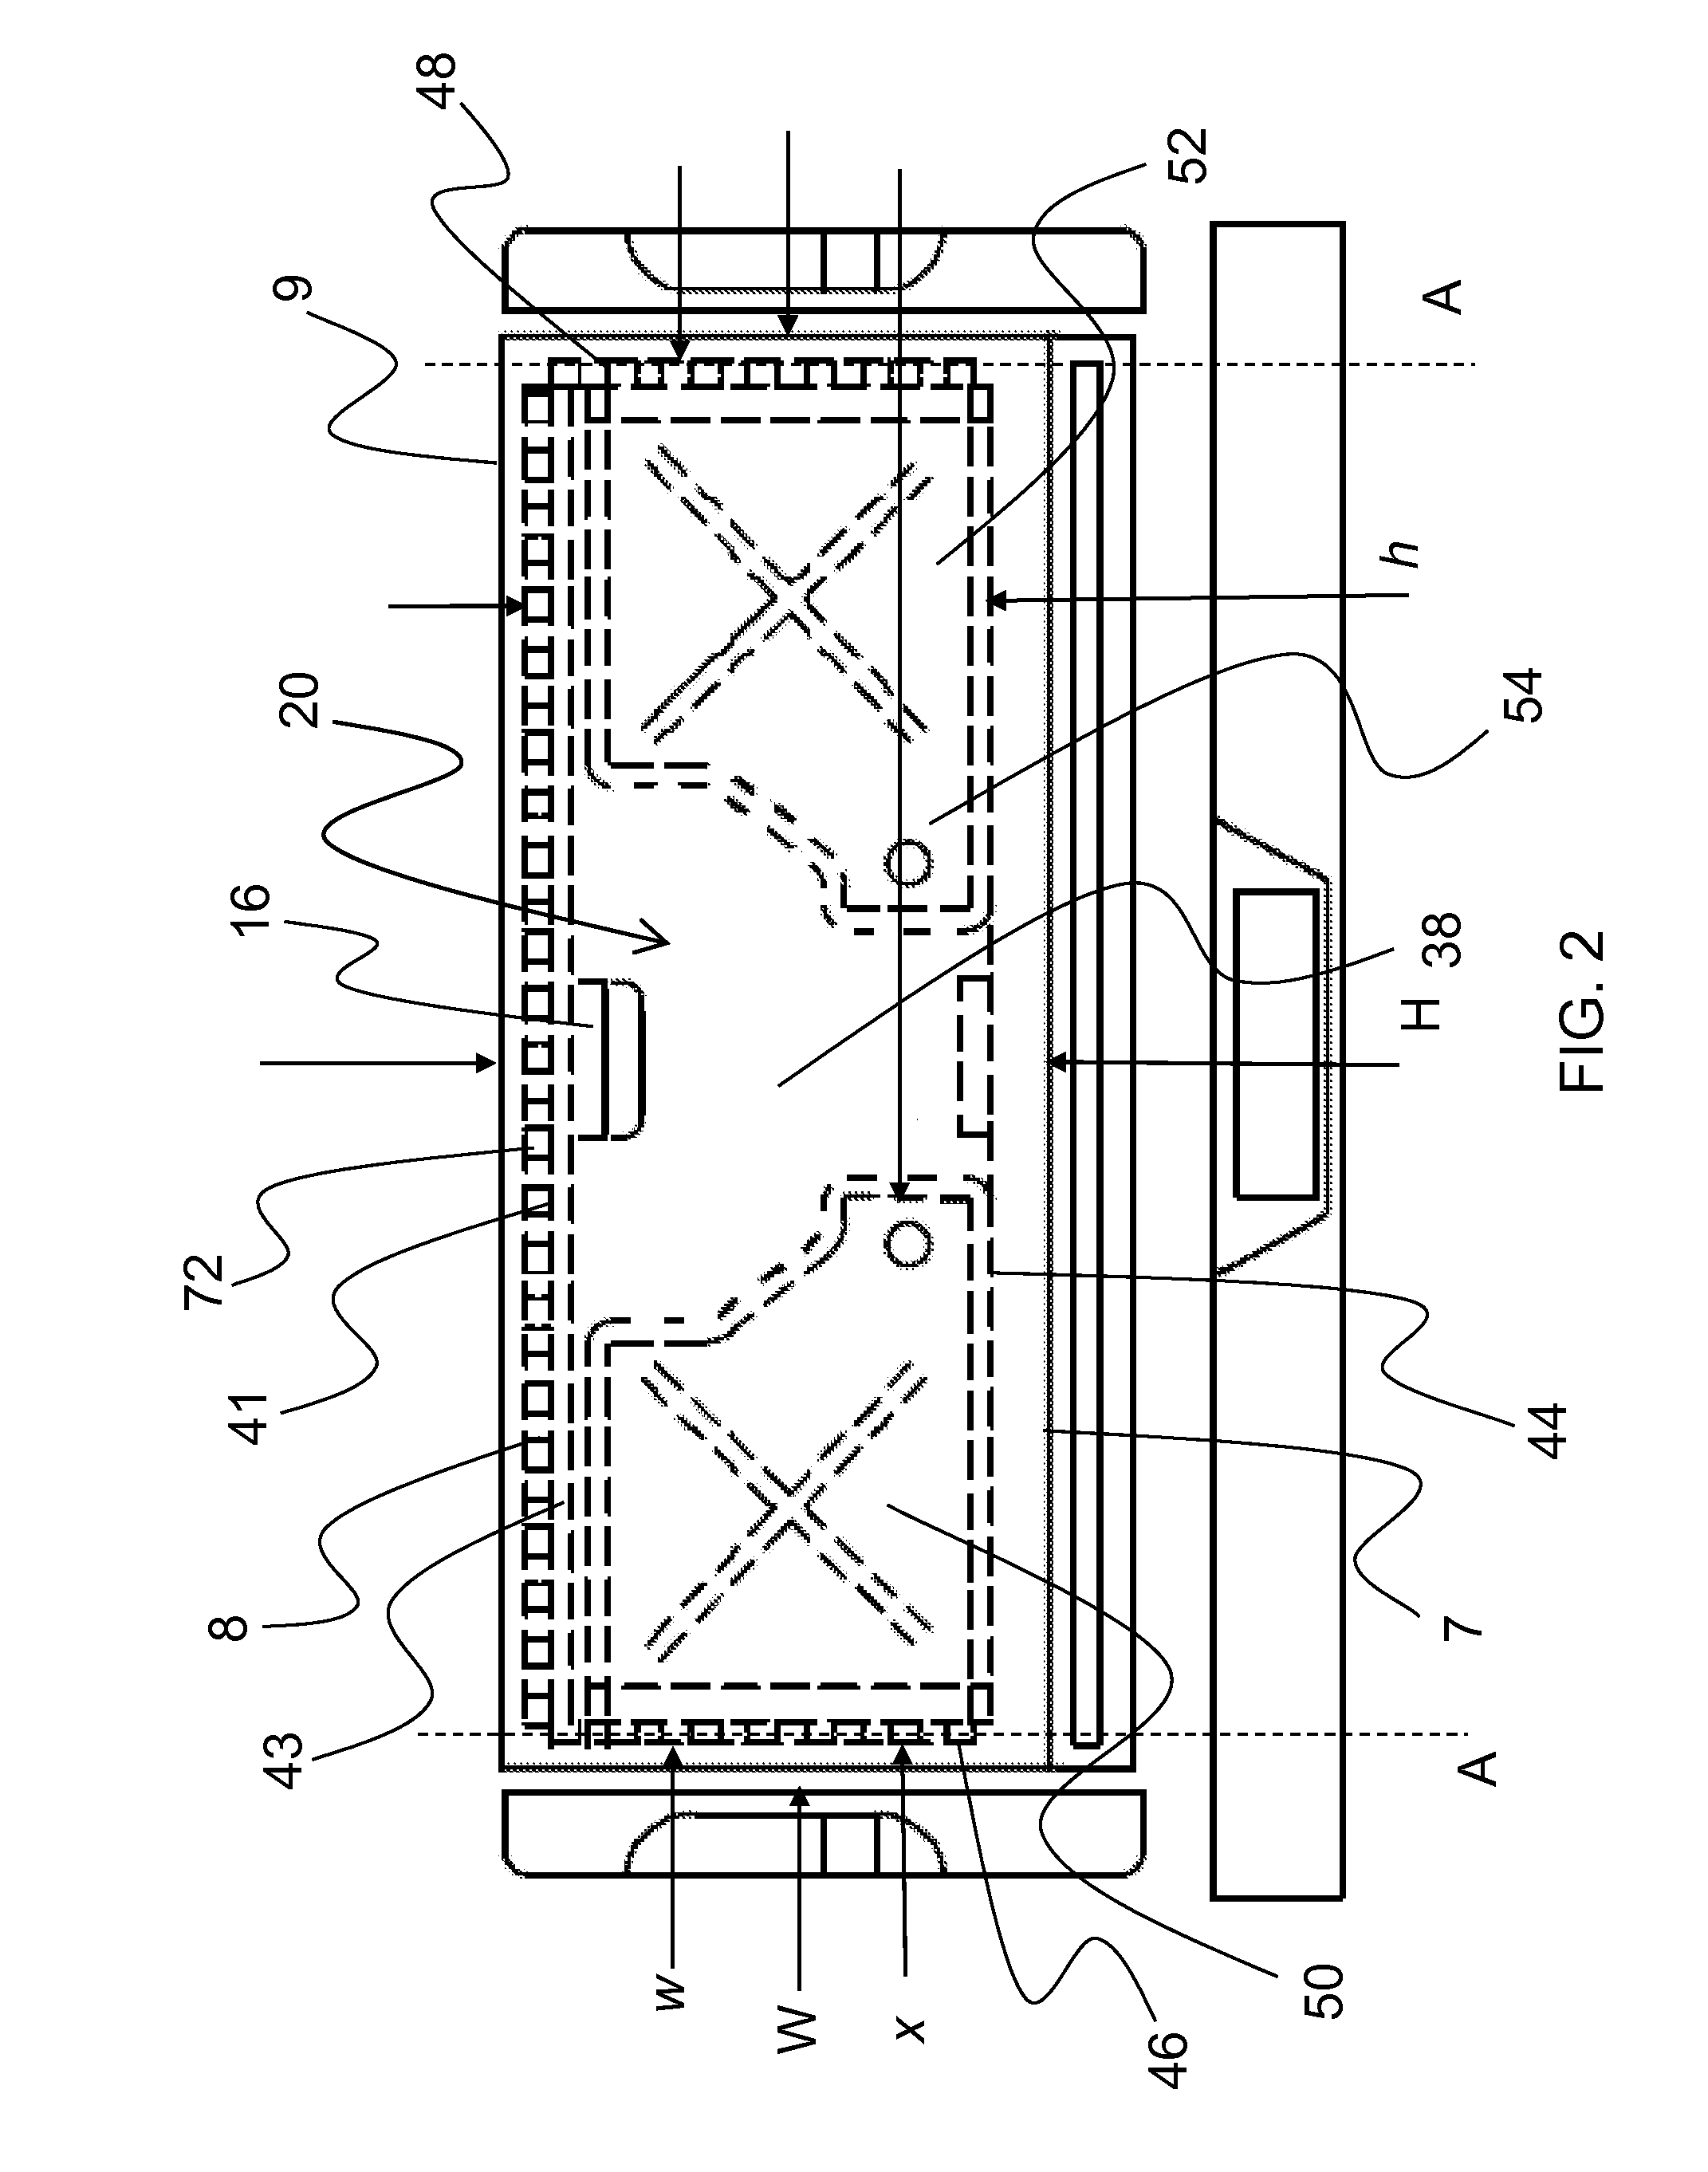 Cargo area extension system method and apparatus